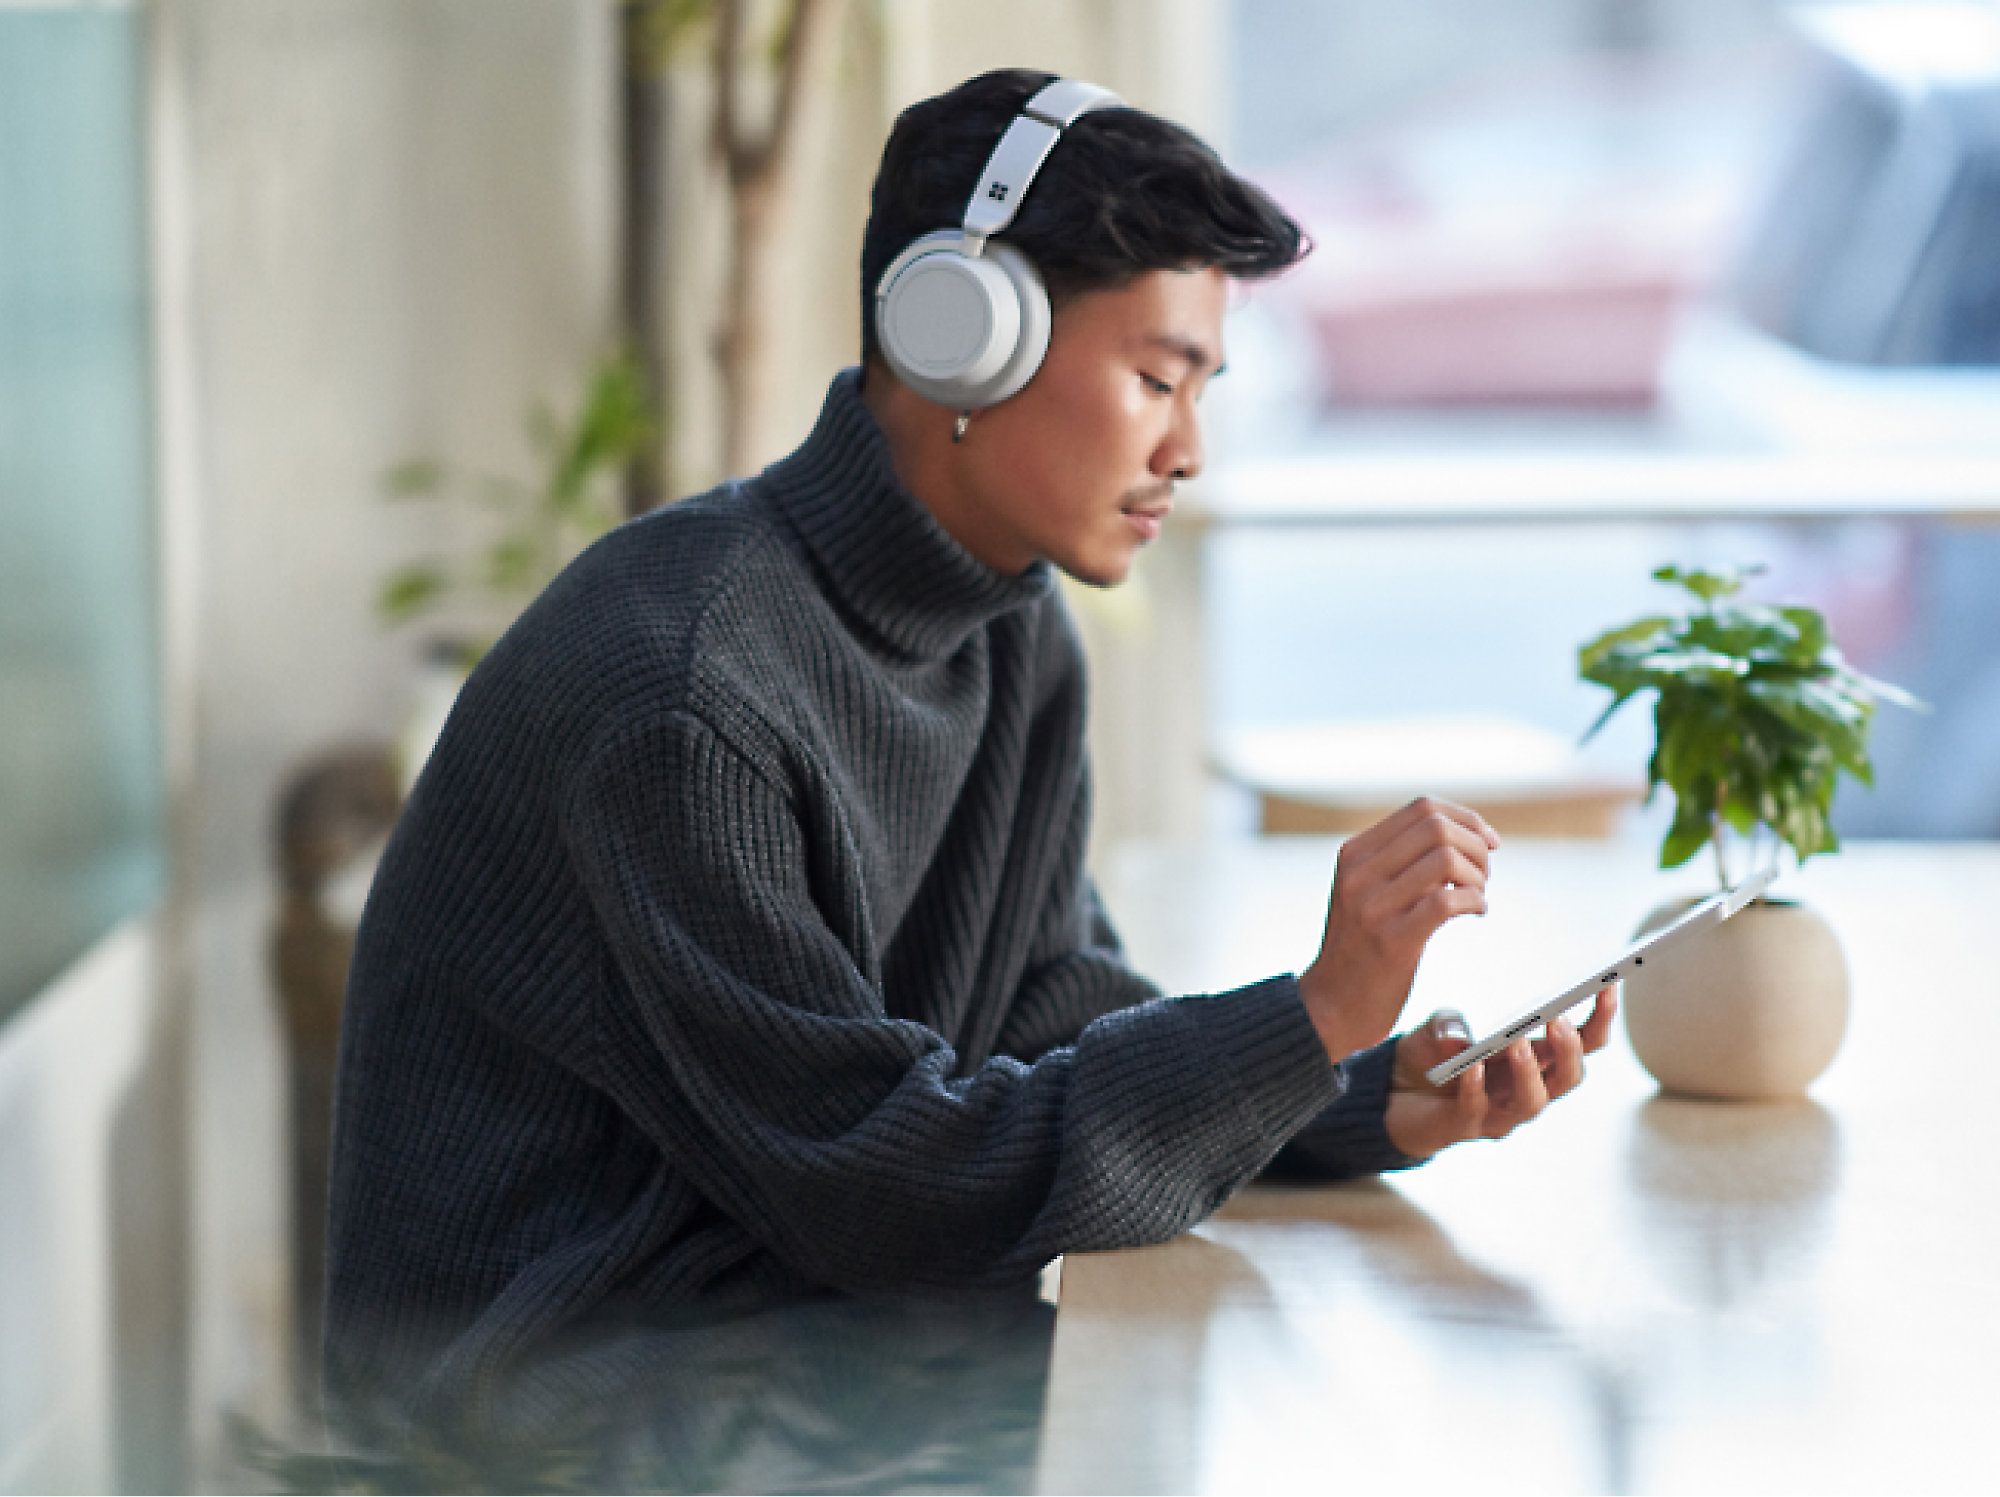 A person wearing headphones and using a tablet